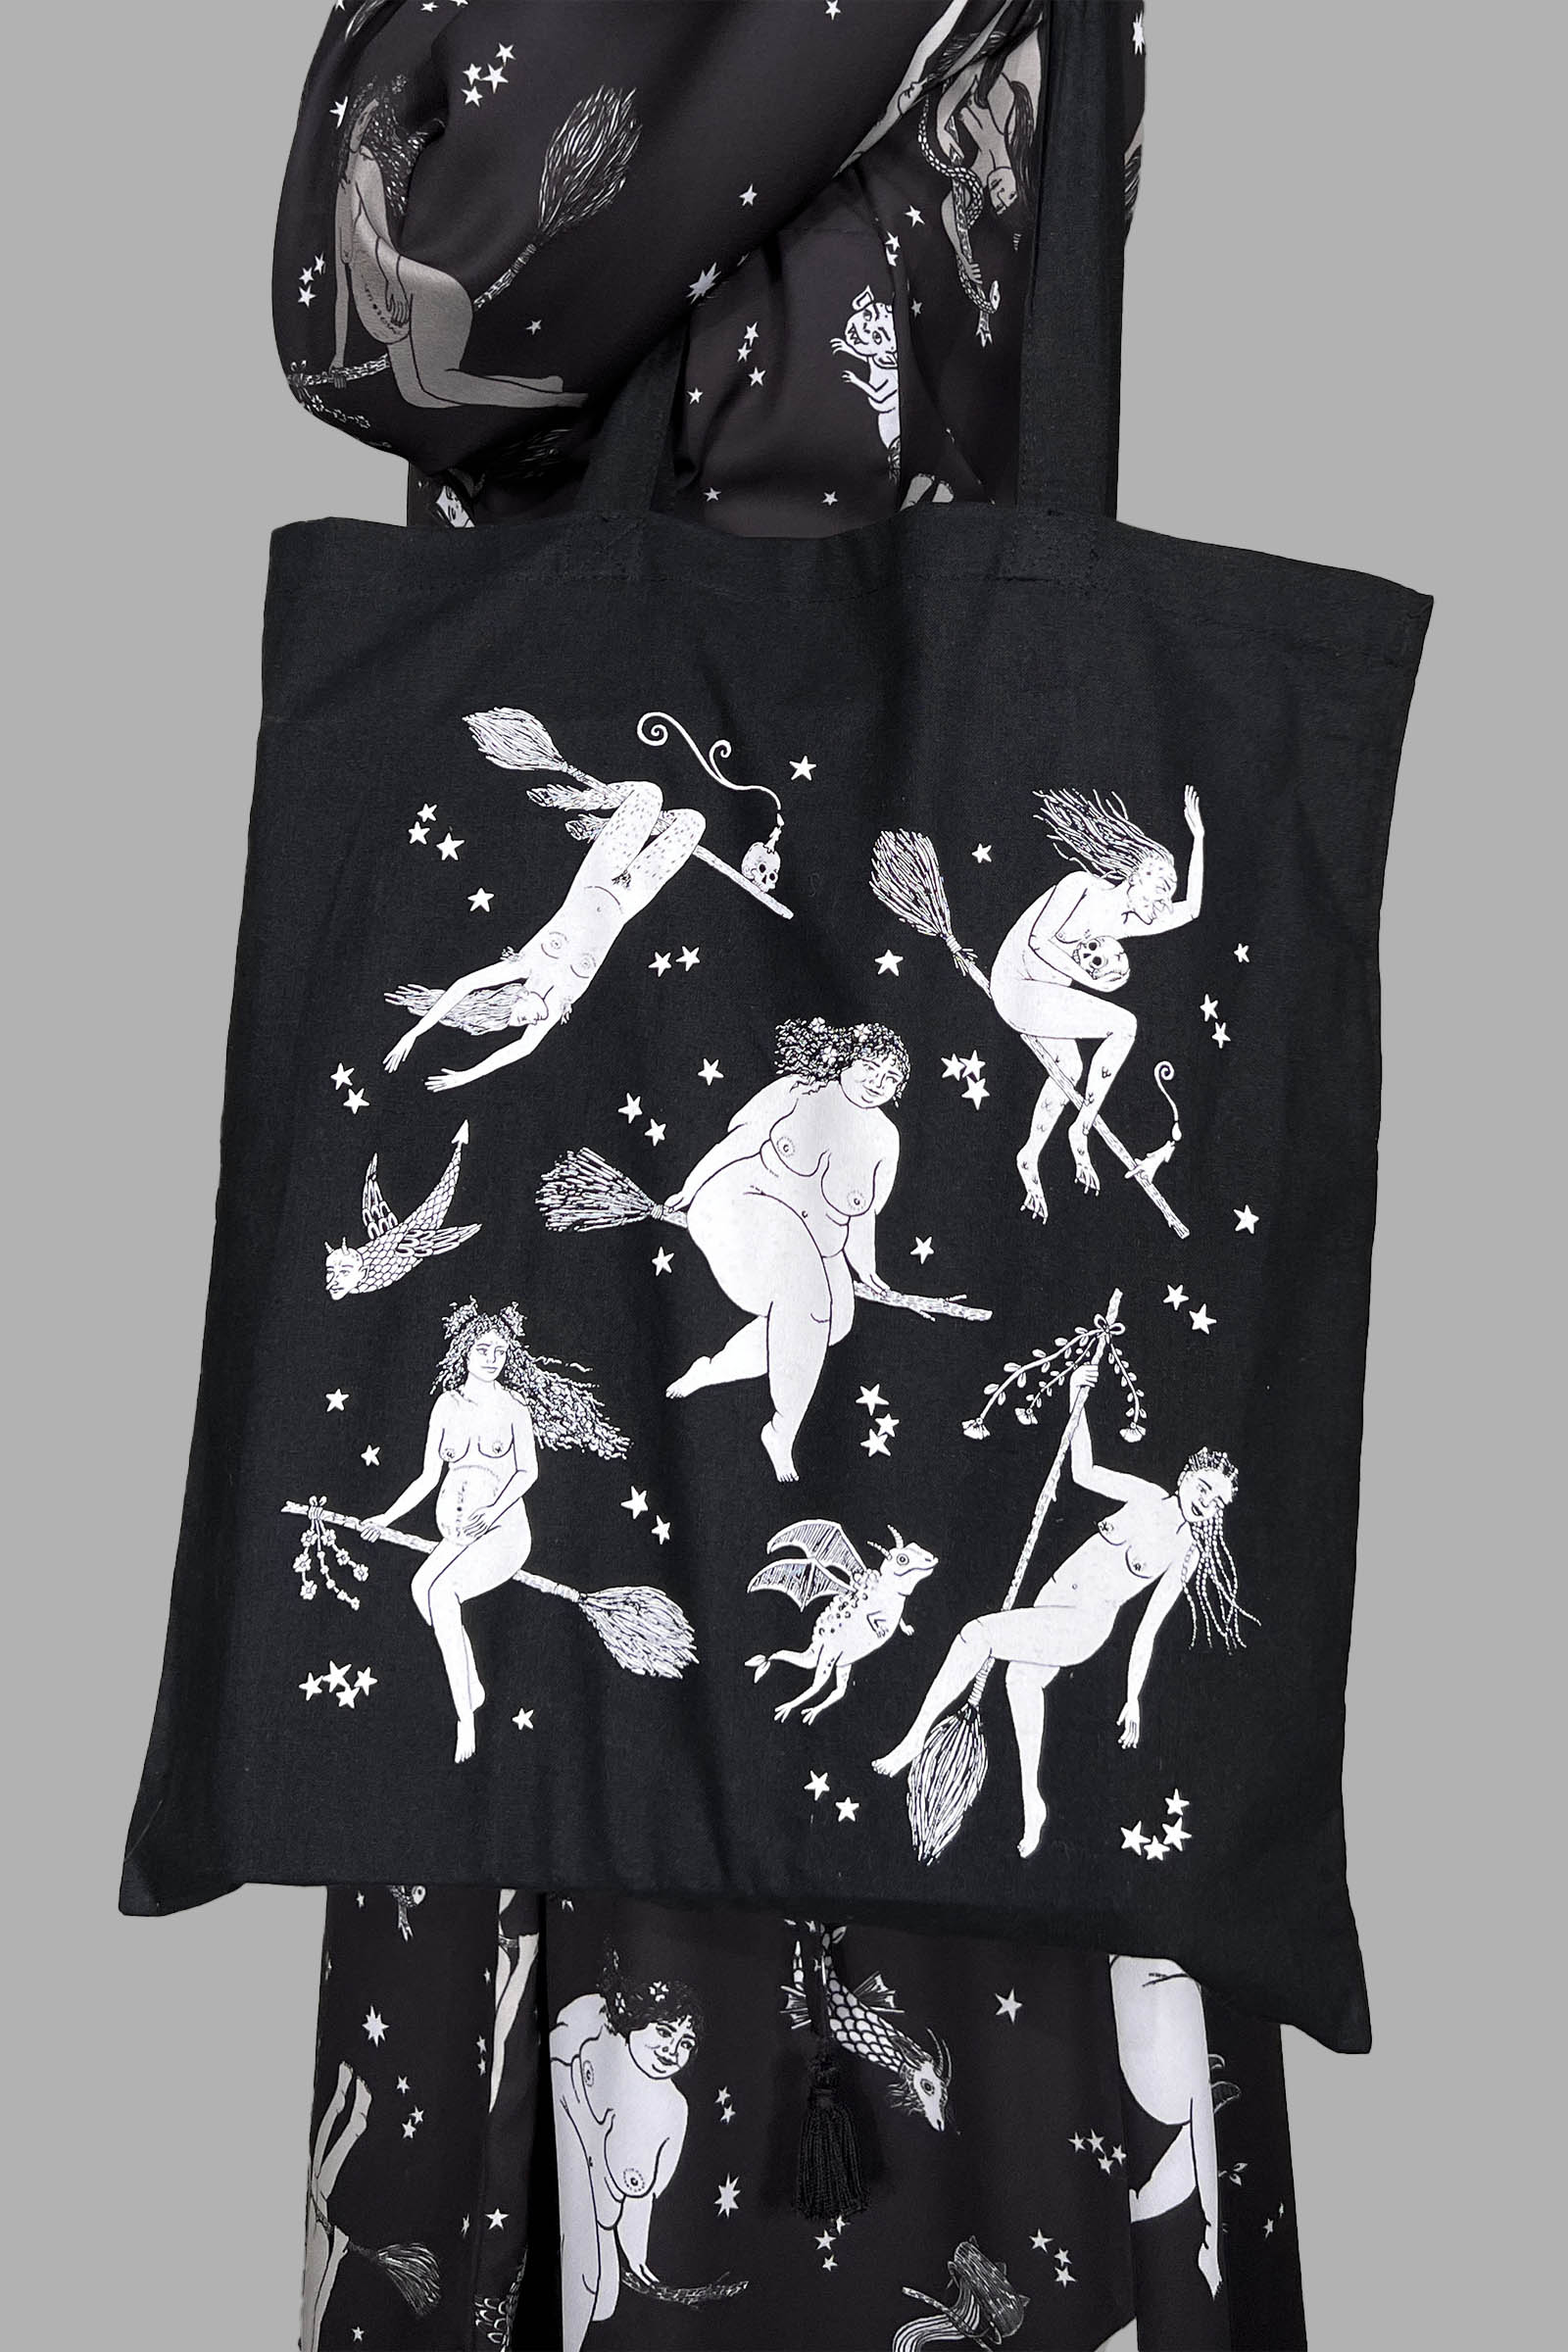 Black tote bag with a white witchy print.